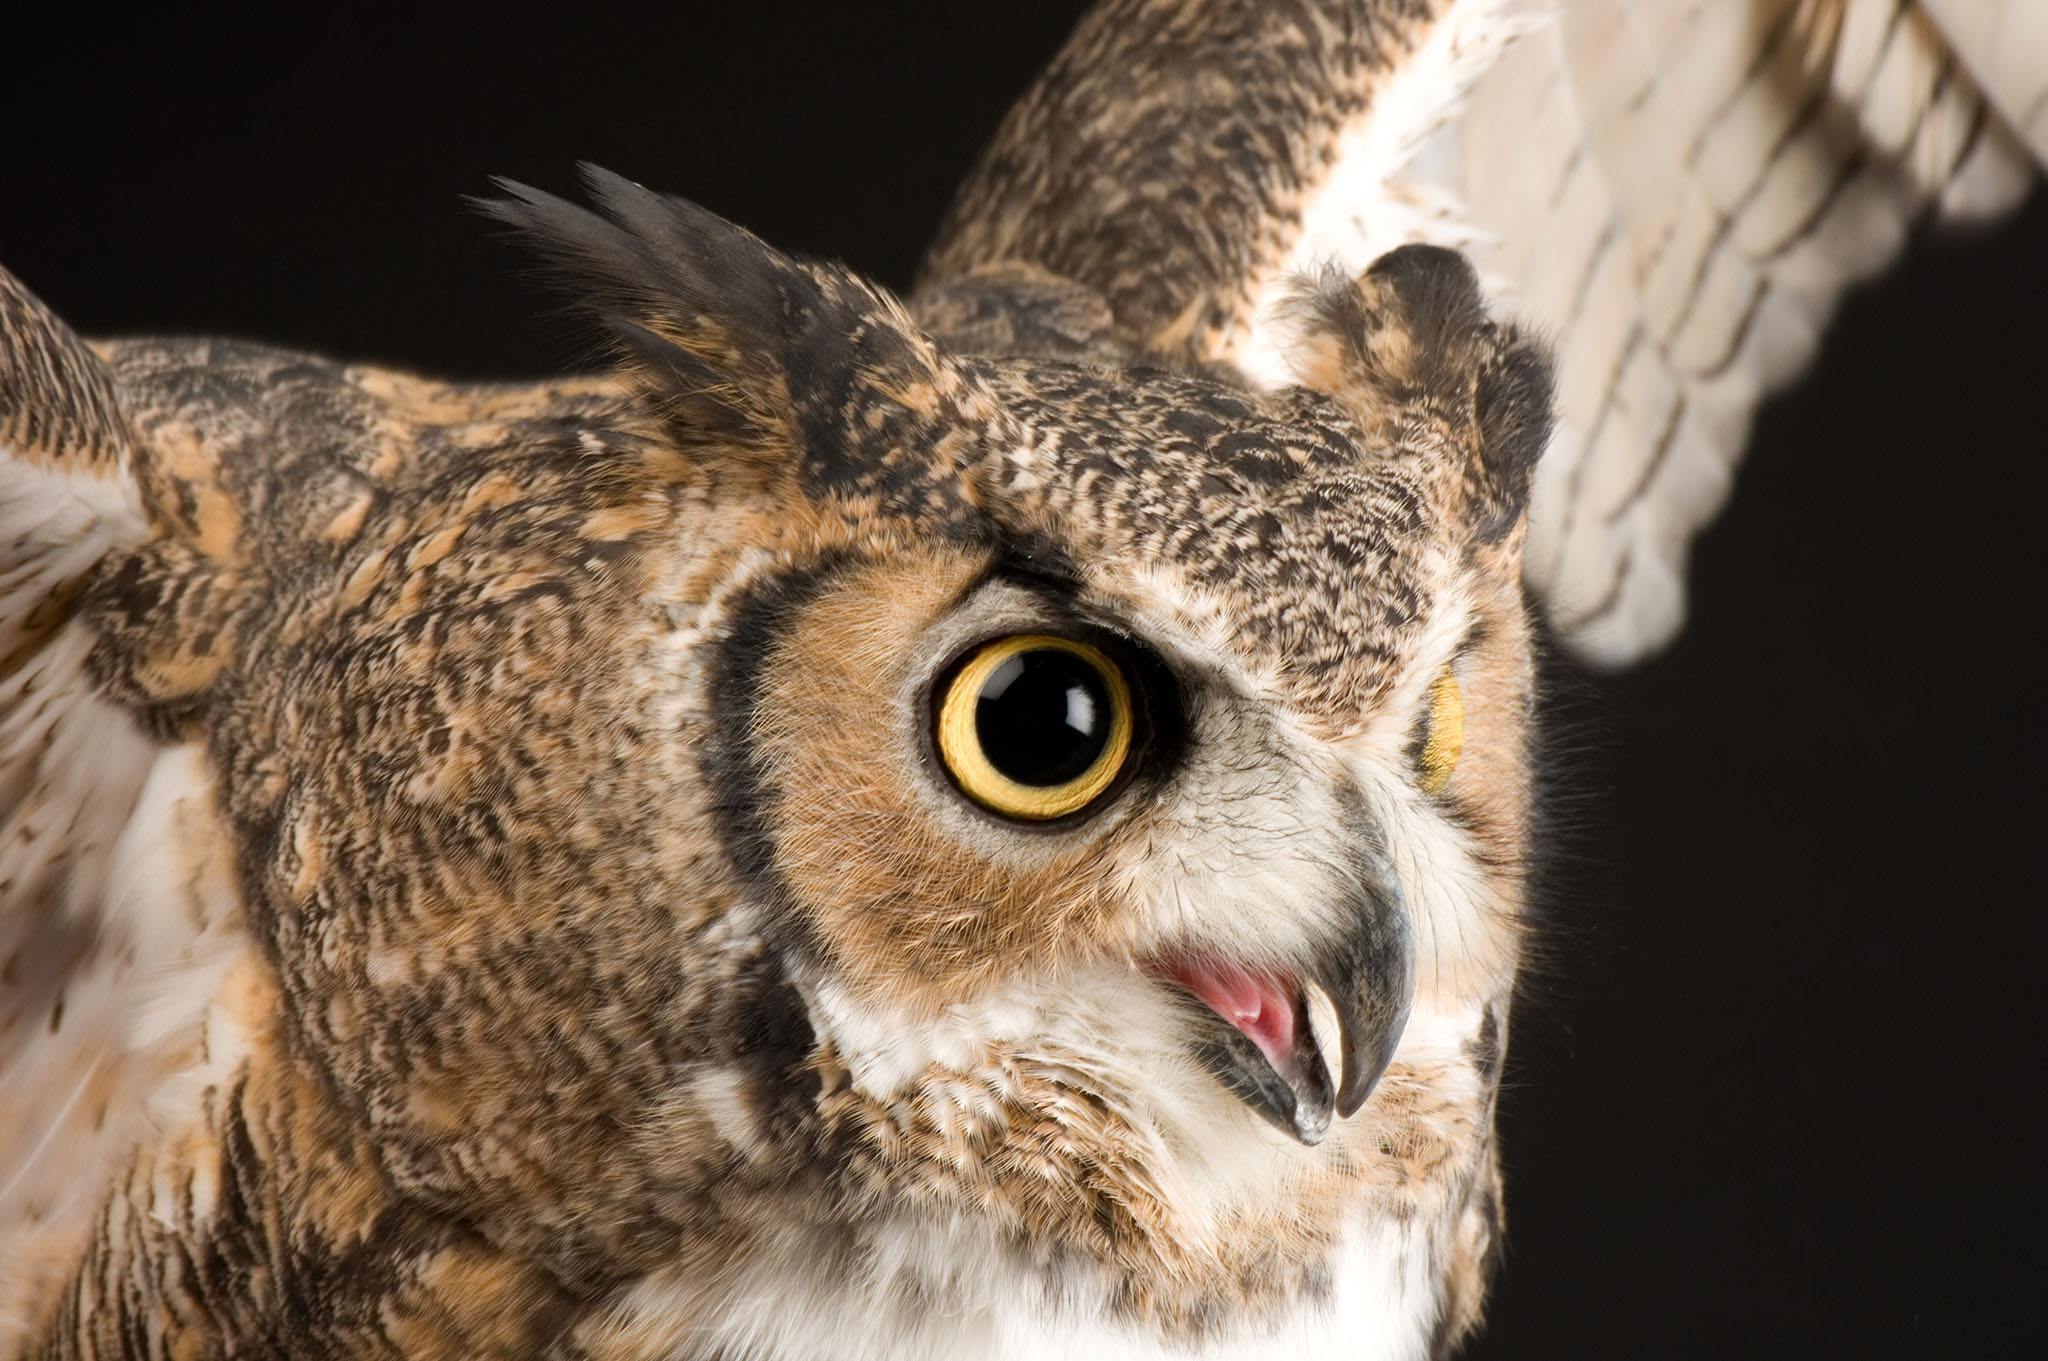 Help Us Pick the Most Superb Owl